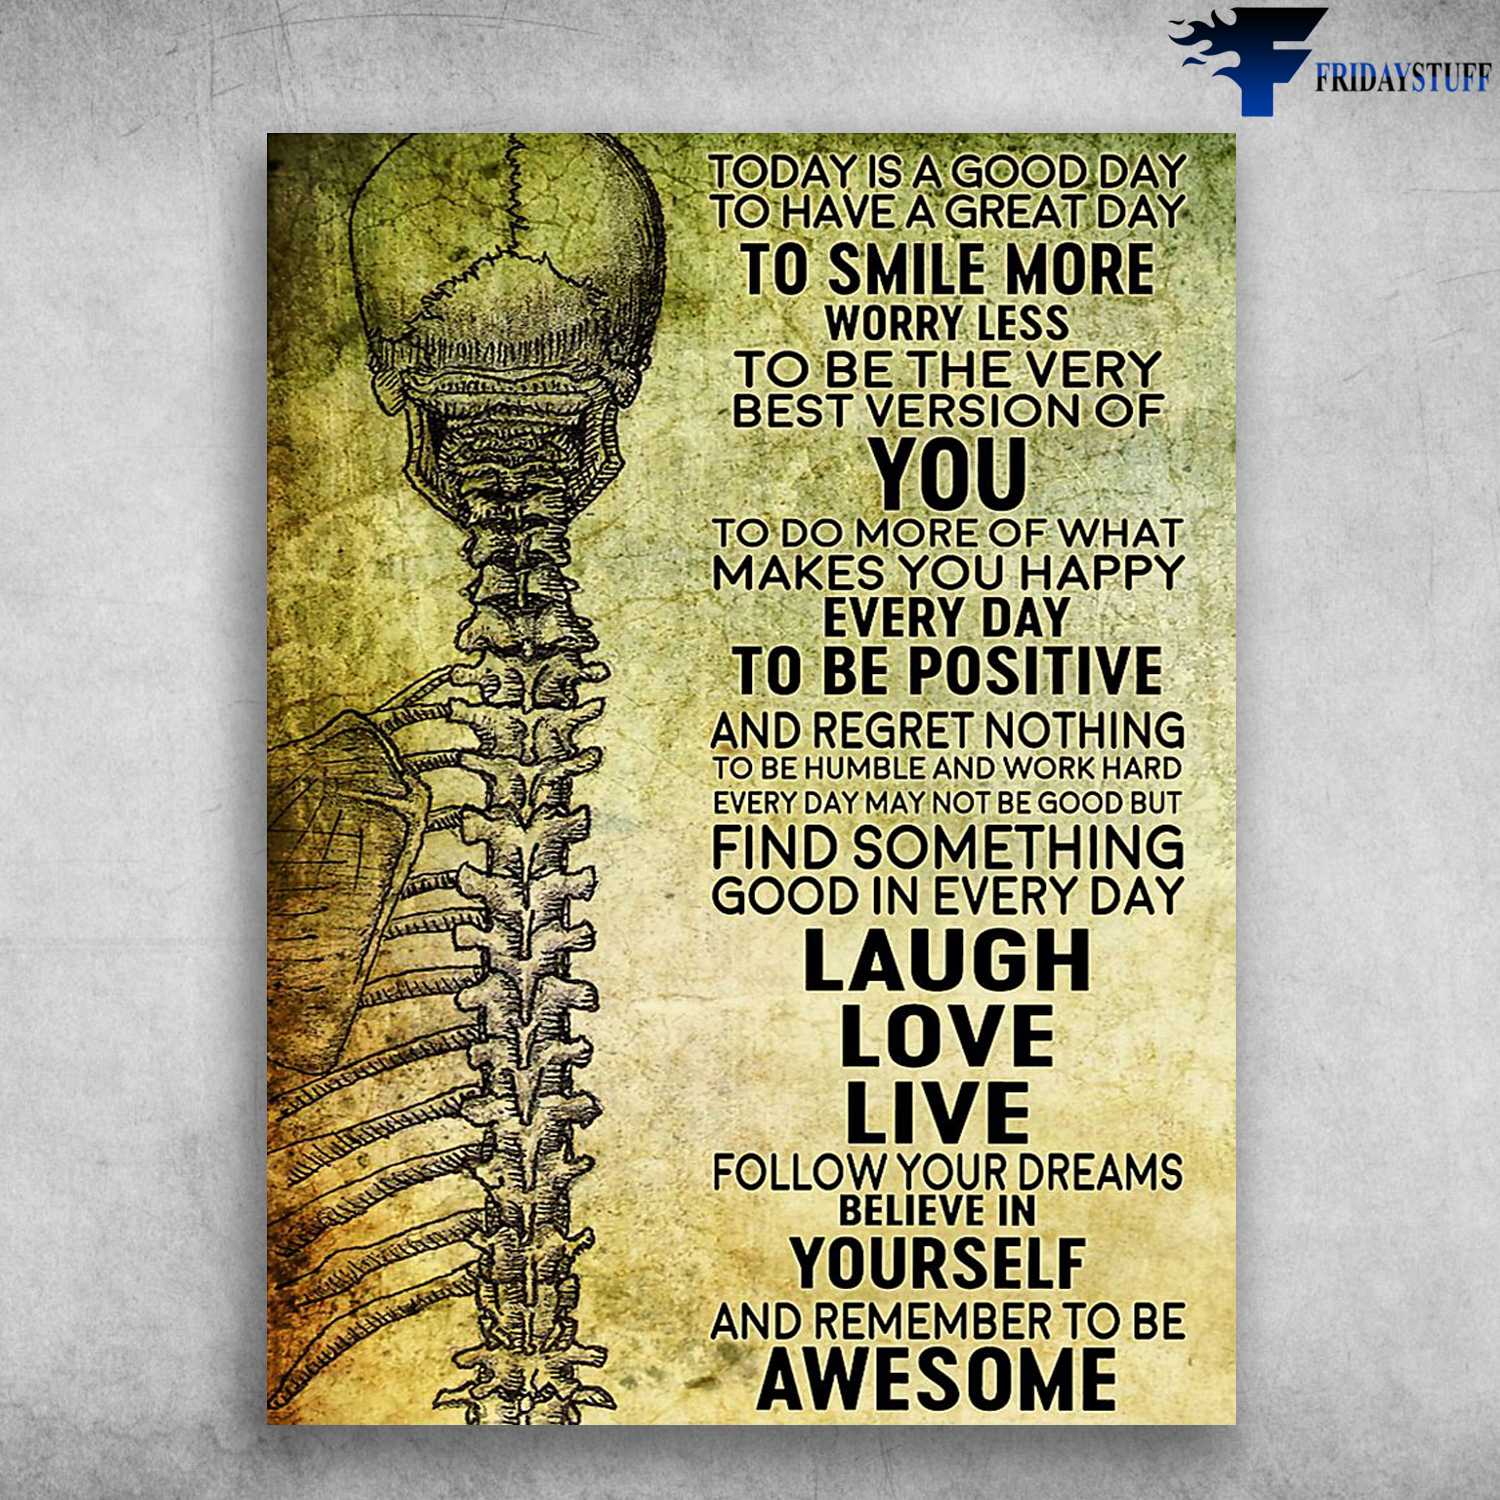 Skeleton Poster - Today Is A Good Day, To Have A Great Day, To Smile More, Worry Less, To Be The Very Best Version Of You, To Do More Of What Makes You Happy Every Day